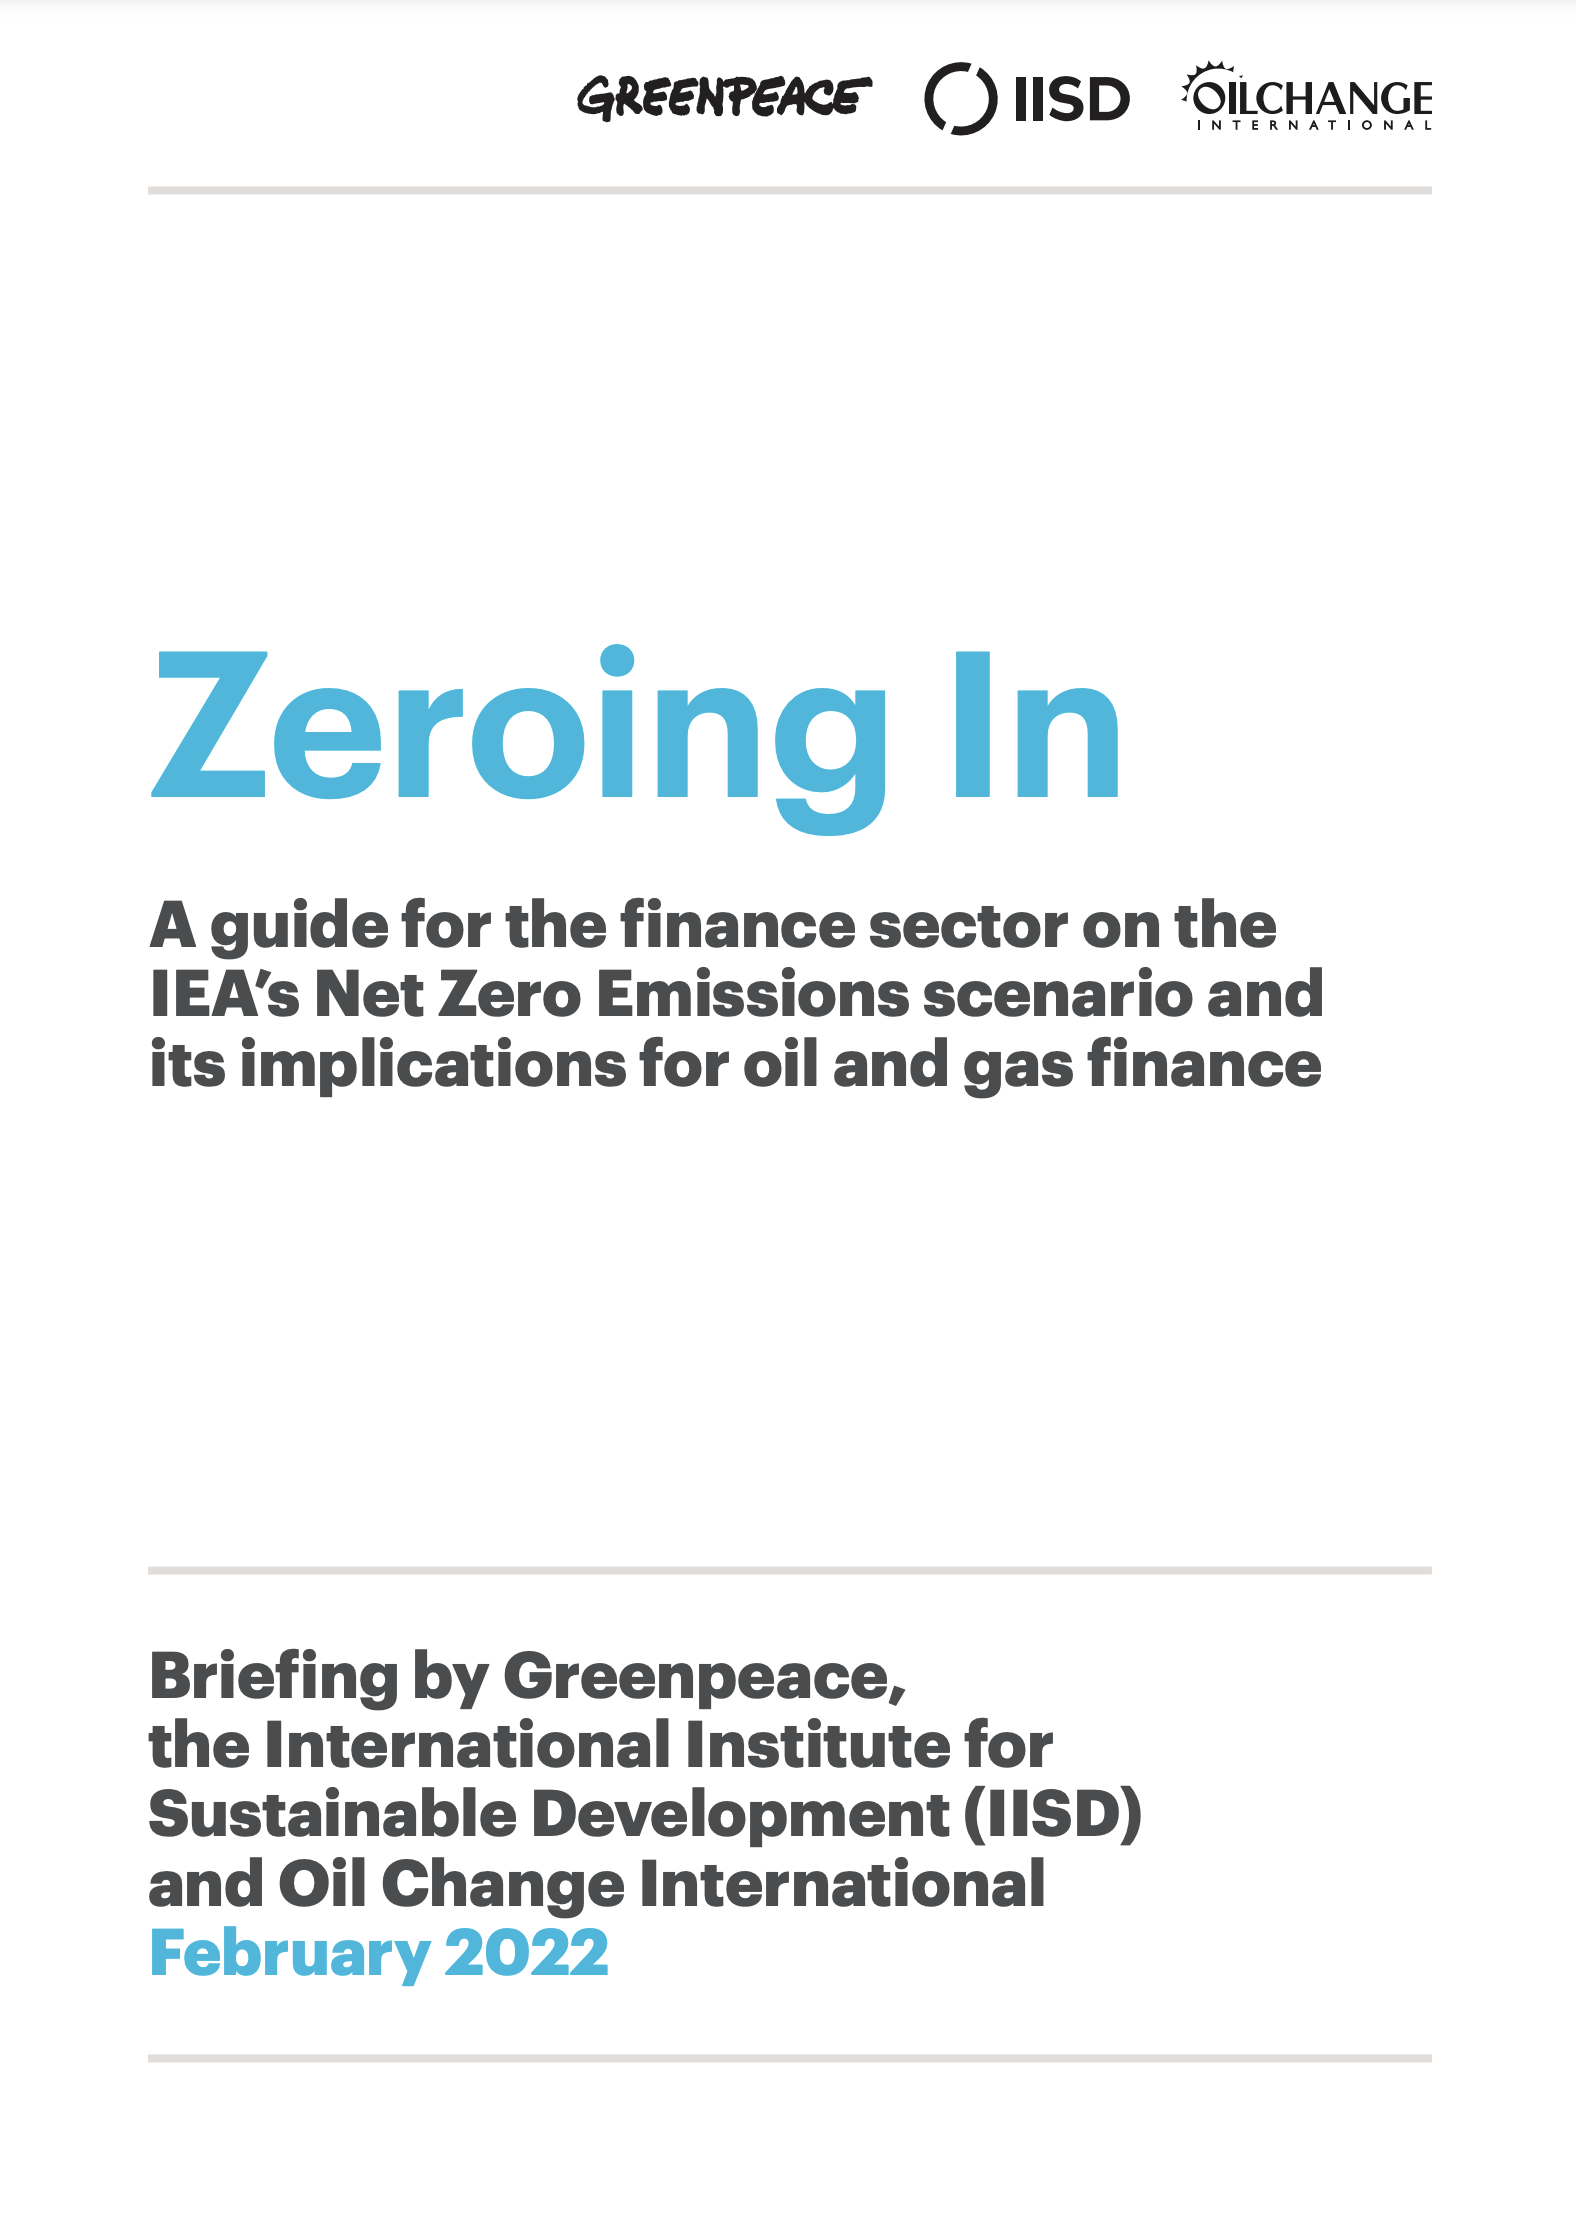 Zeroing In: A guide for the finance sector on the IEA’s Net Zero Emissions scenario and its implications for oil and gas finance